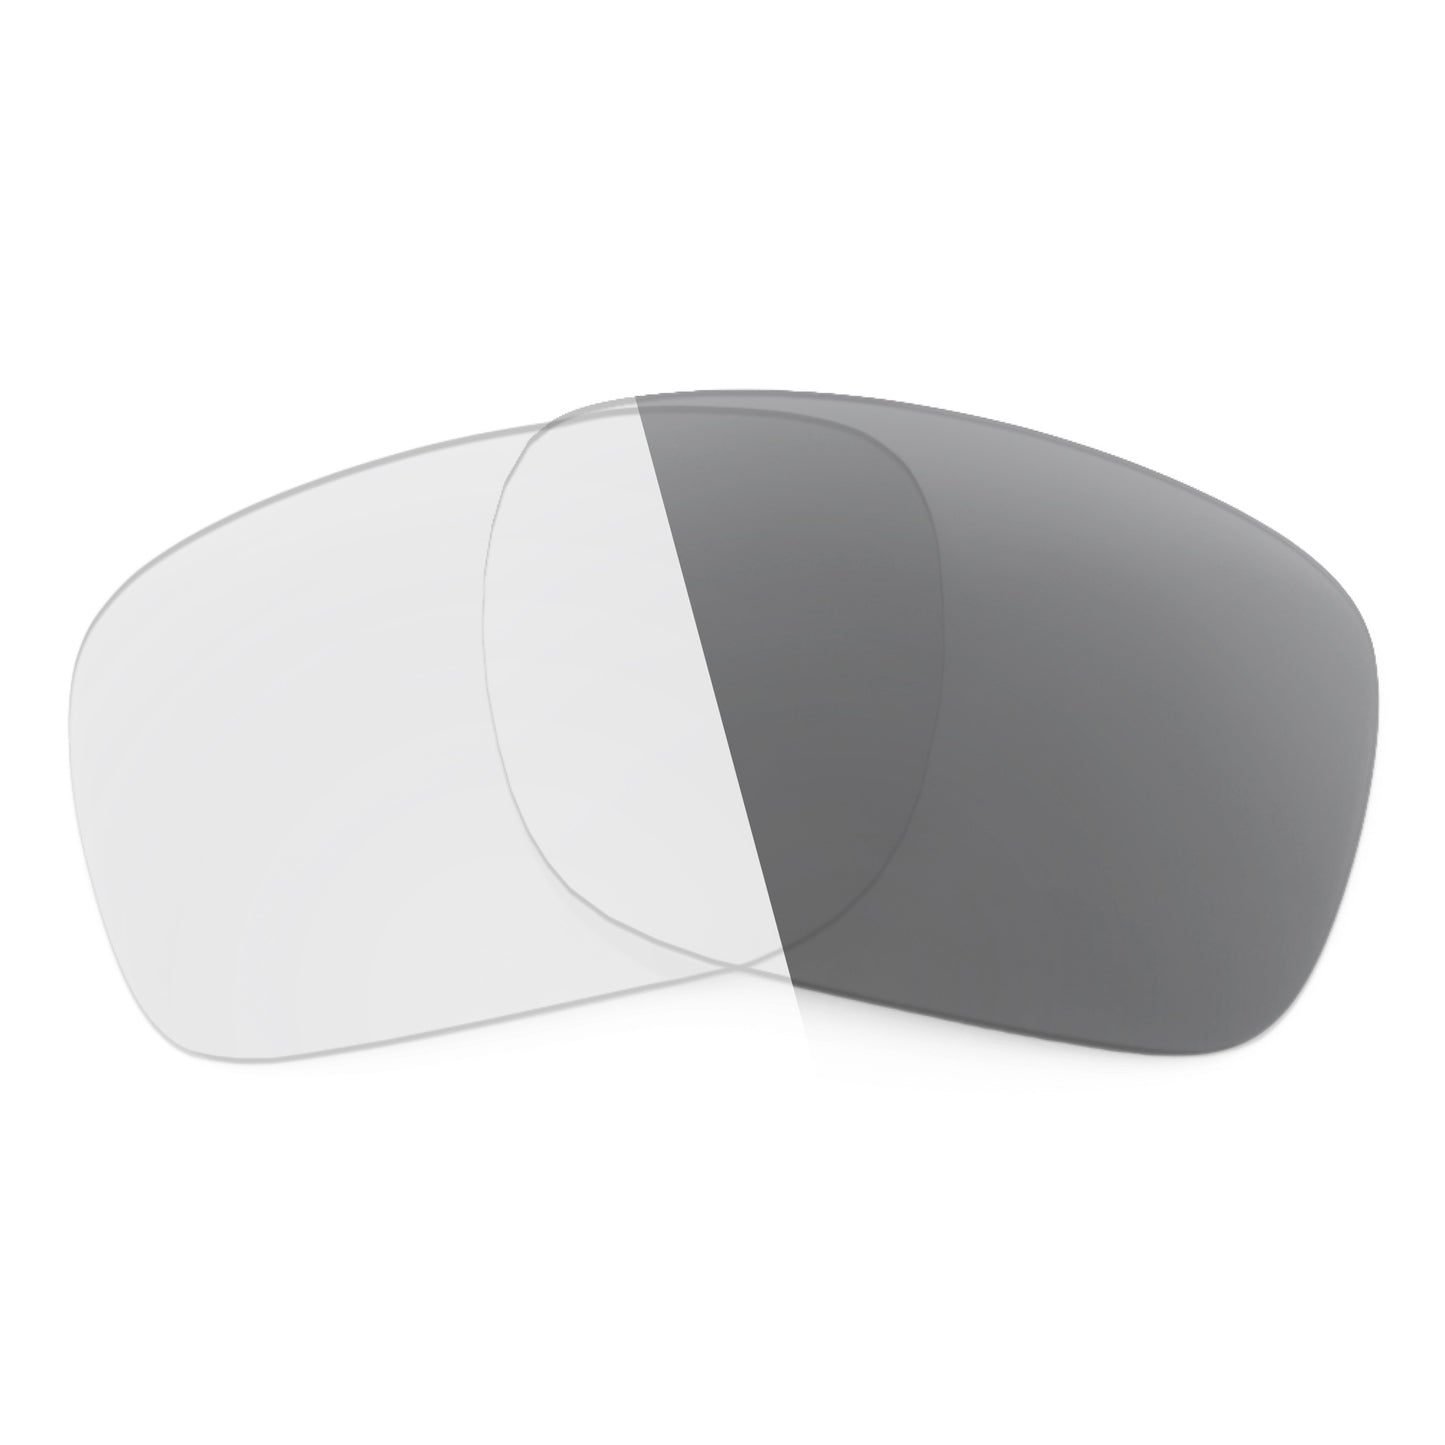 Revant replacement lenses for Ray-Ban RB3540 56mm Non-Polarized Adapt Gray Photochromic